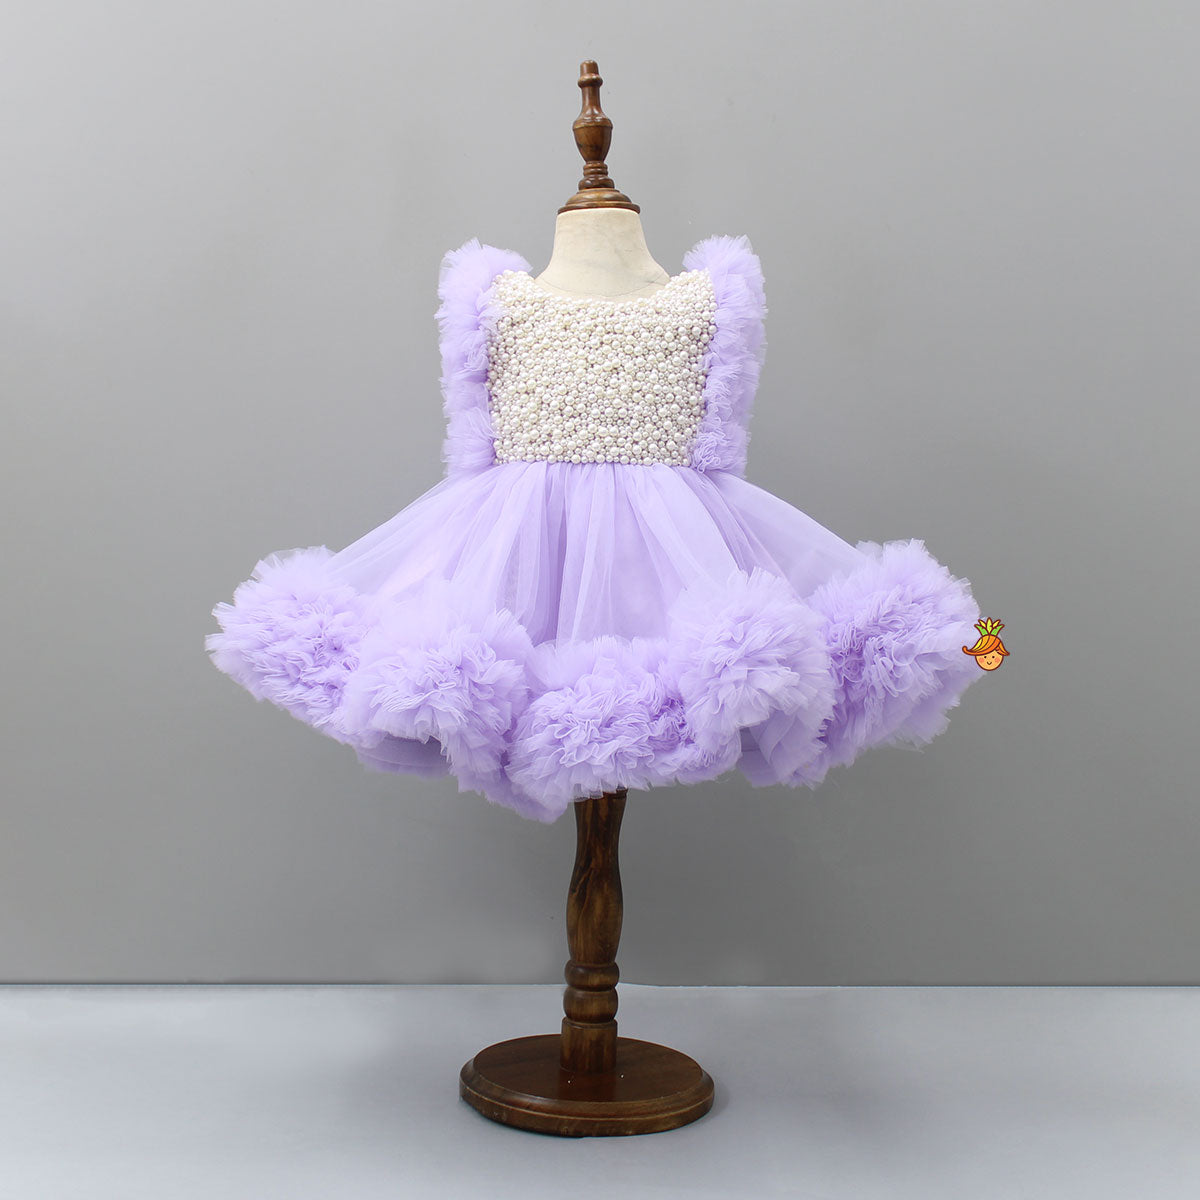 Pre Order: Embroidered Yoke Ruffle Hem Lavender Dress With Detachable Trail And Matching Head Band